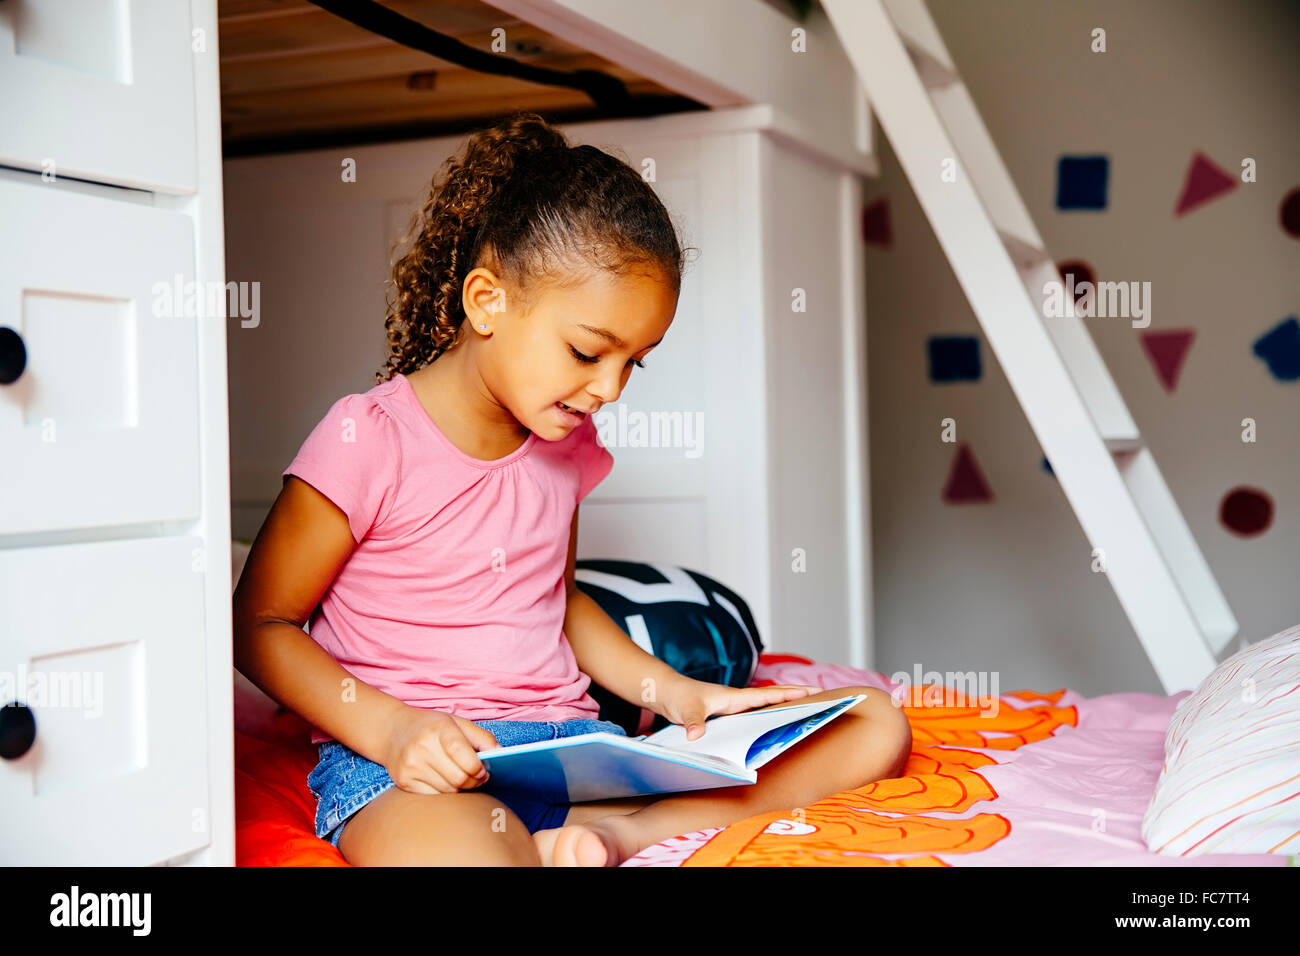 Mixed race girl reading on bed Stock Photo